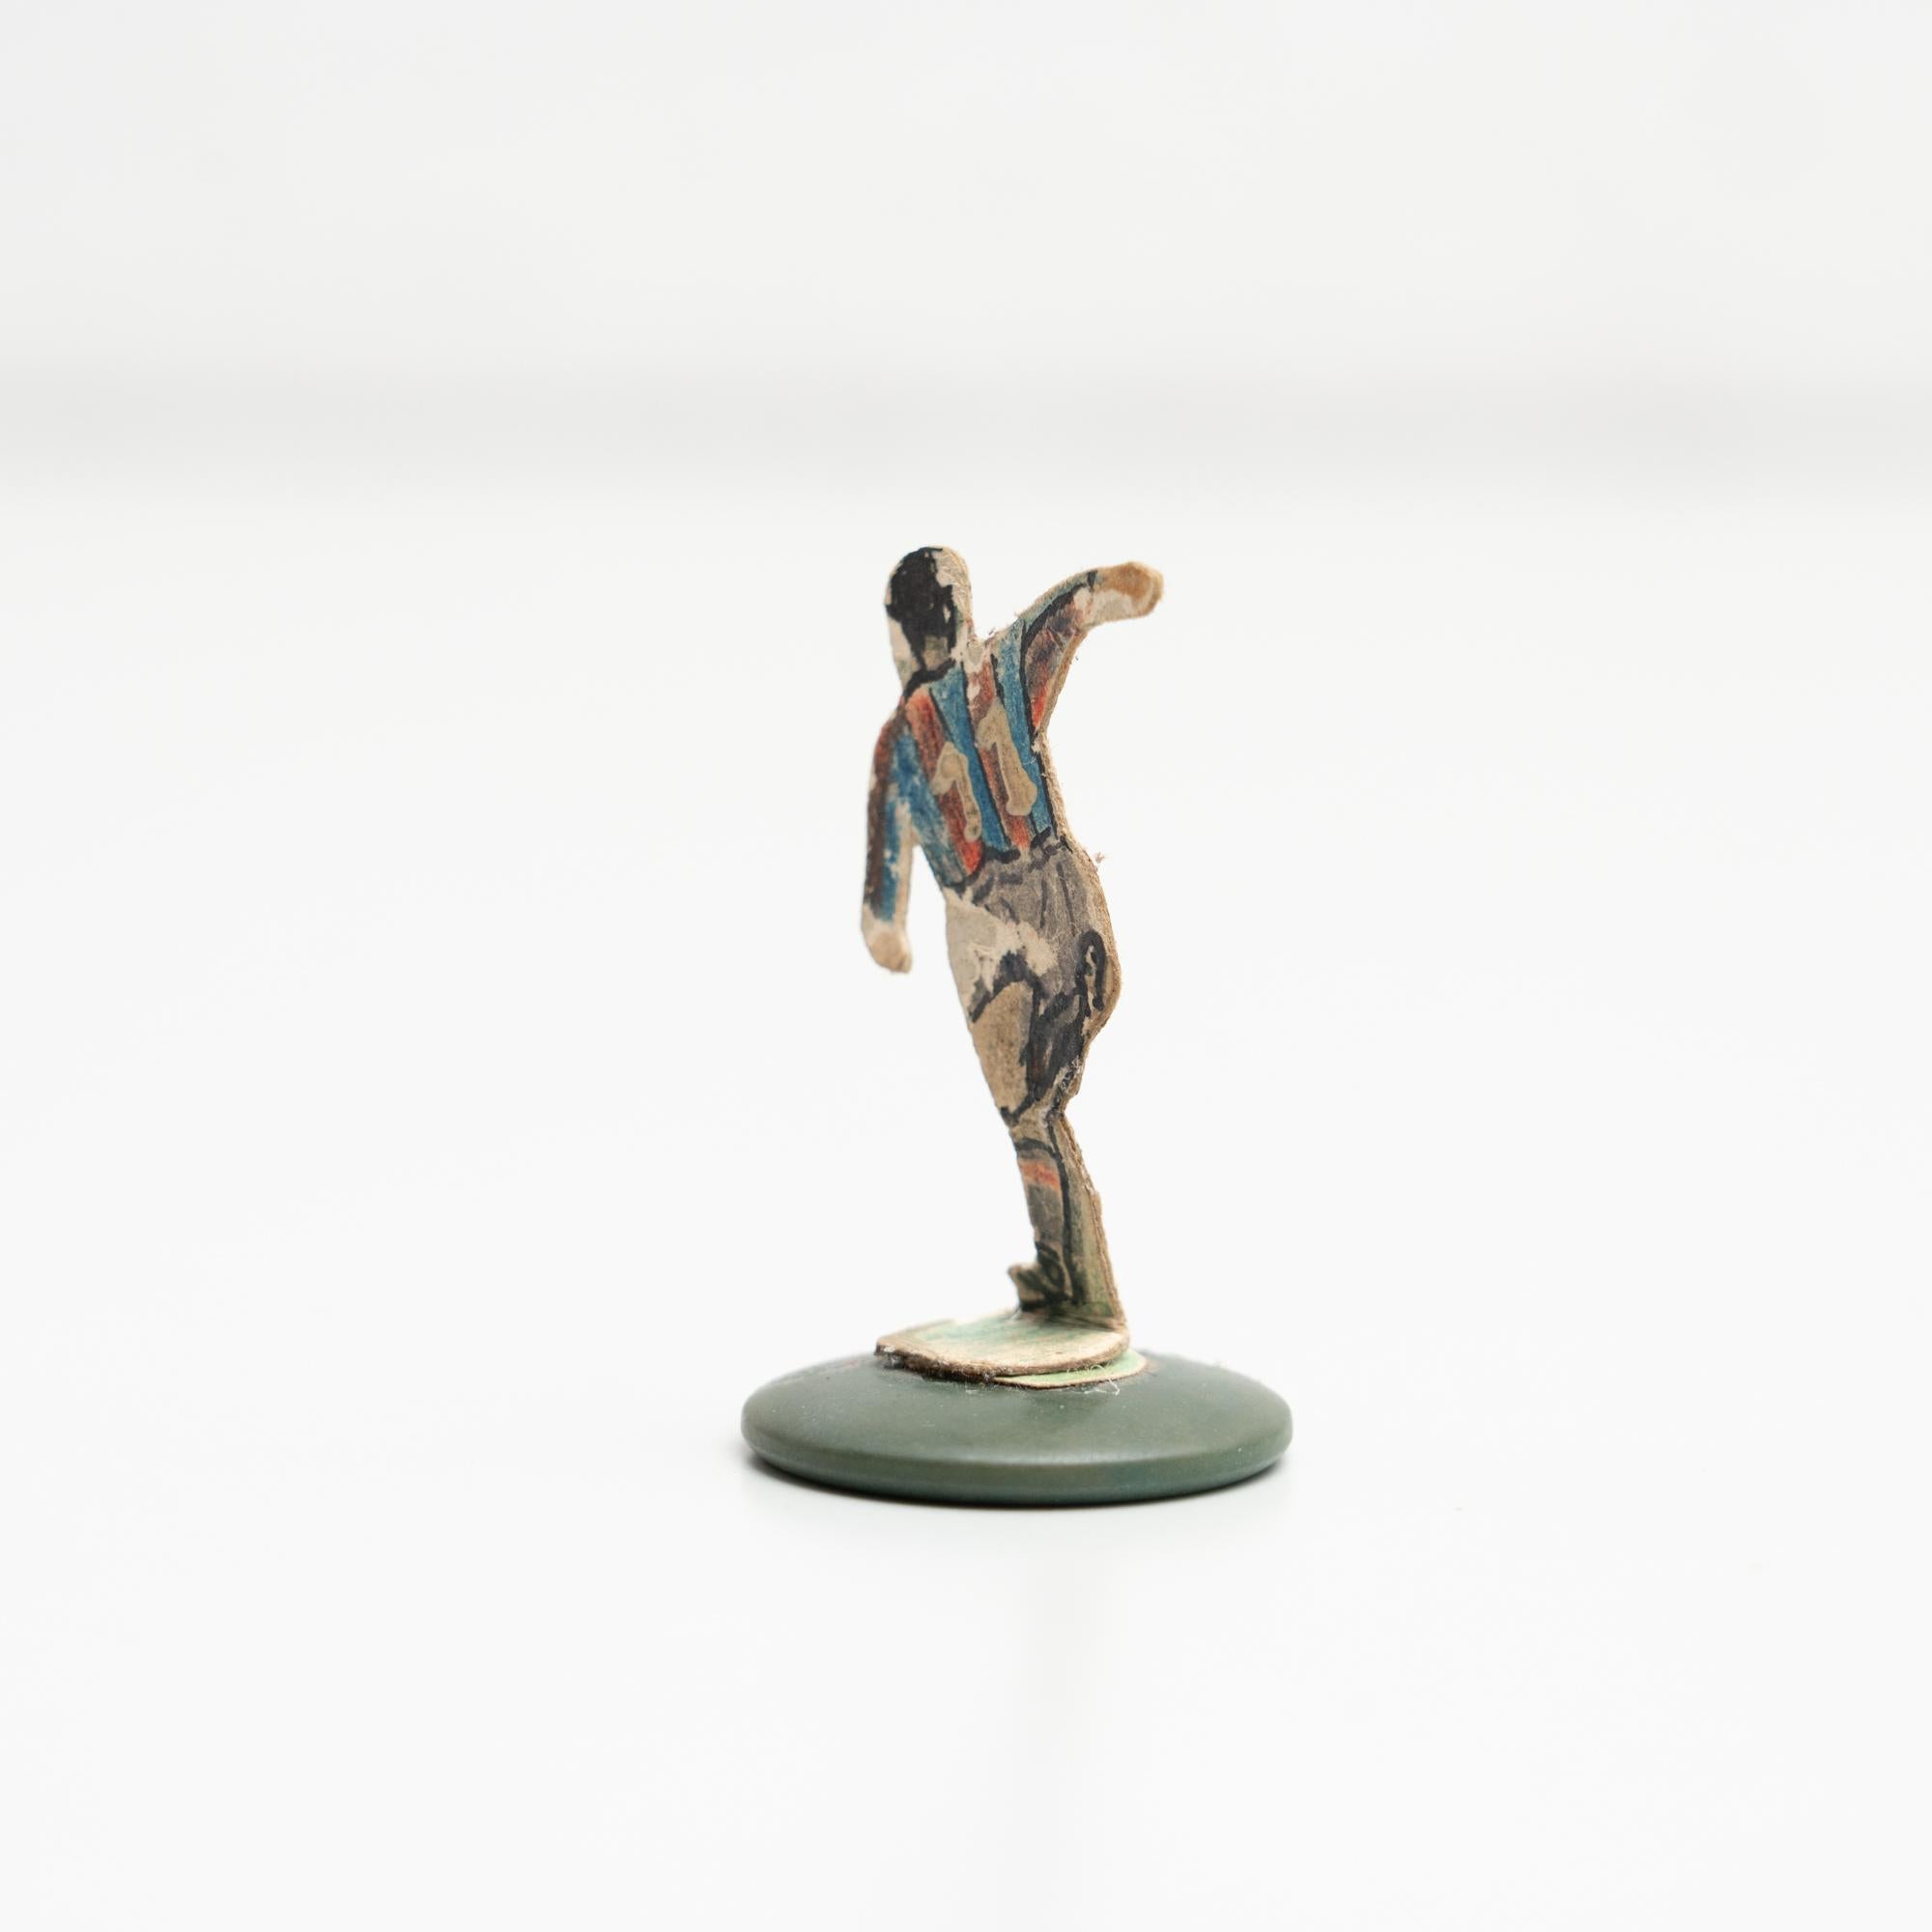 Paper Traditional Antique Button Soccer Game Figure, circa 1950 For Sale